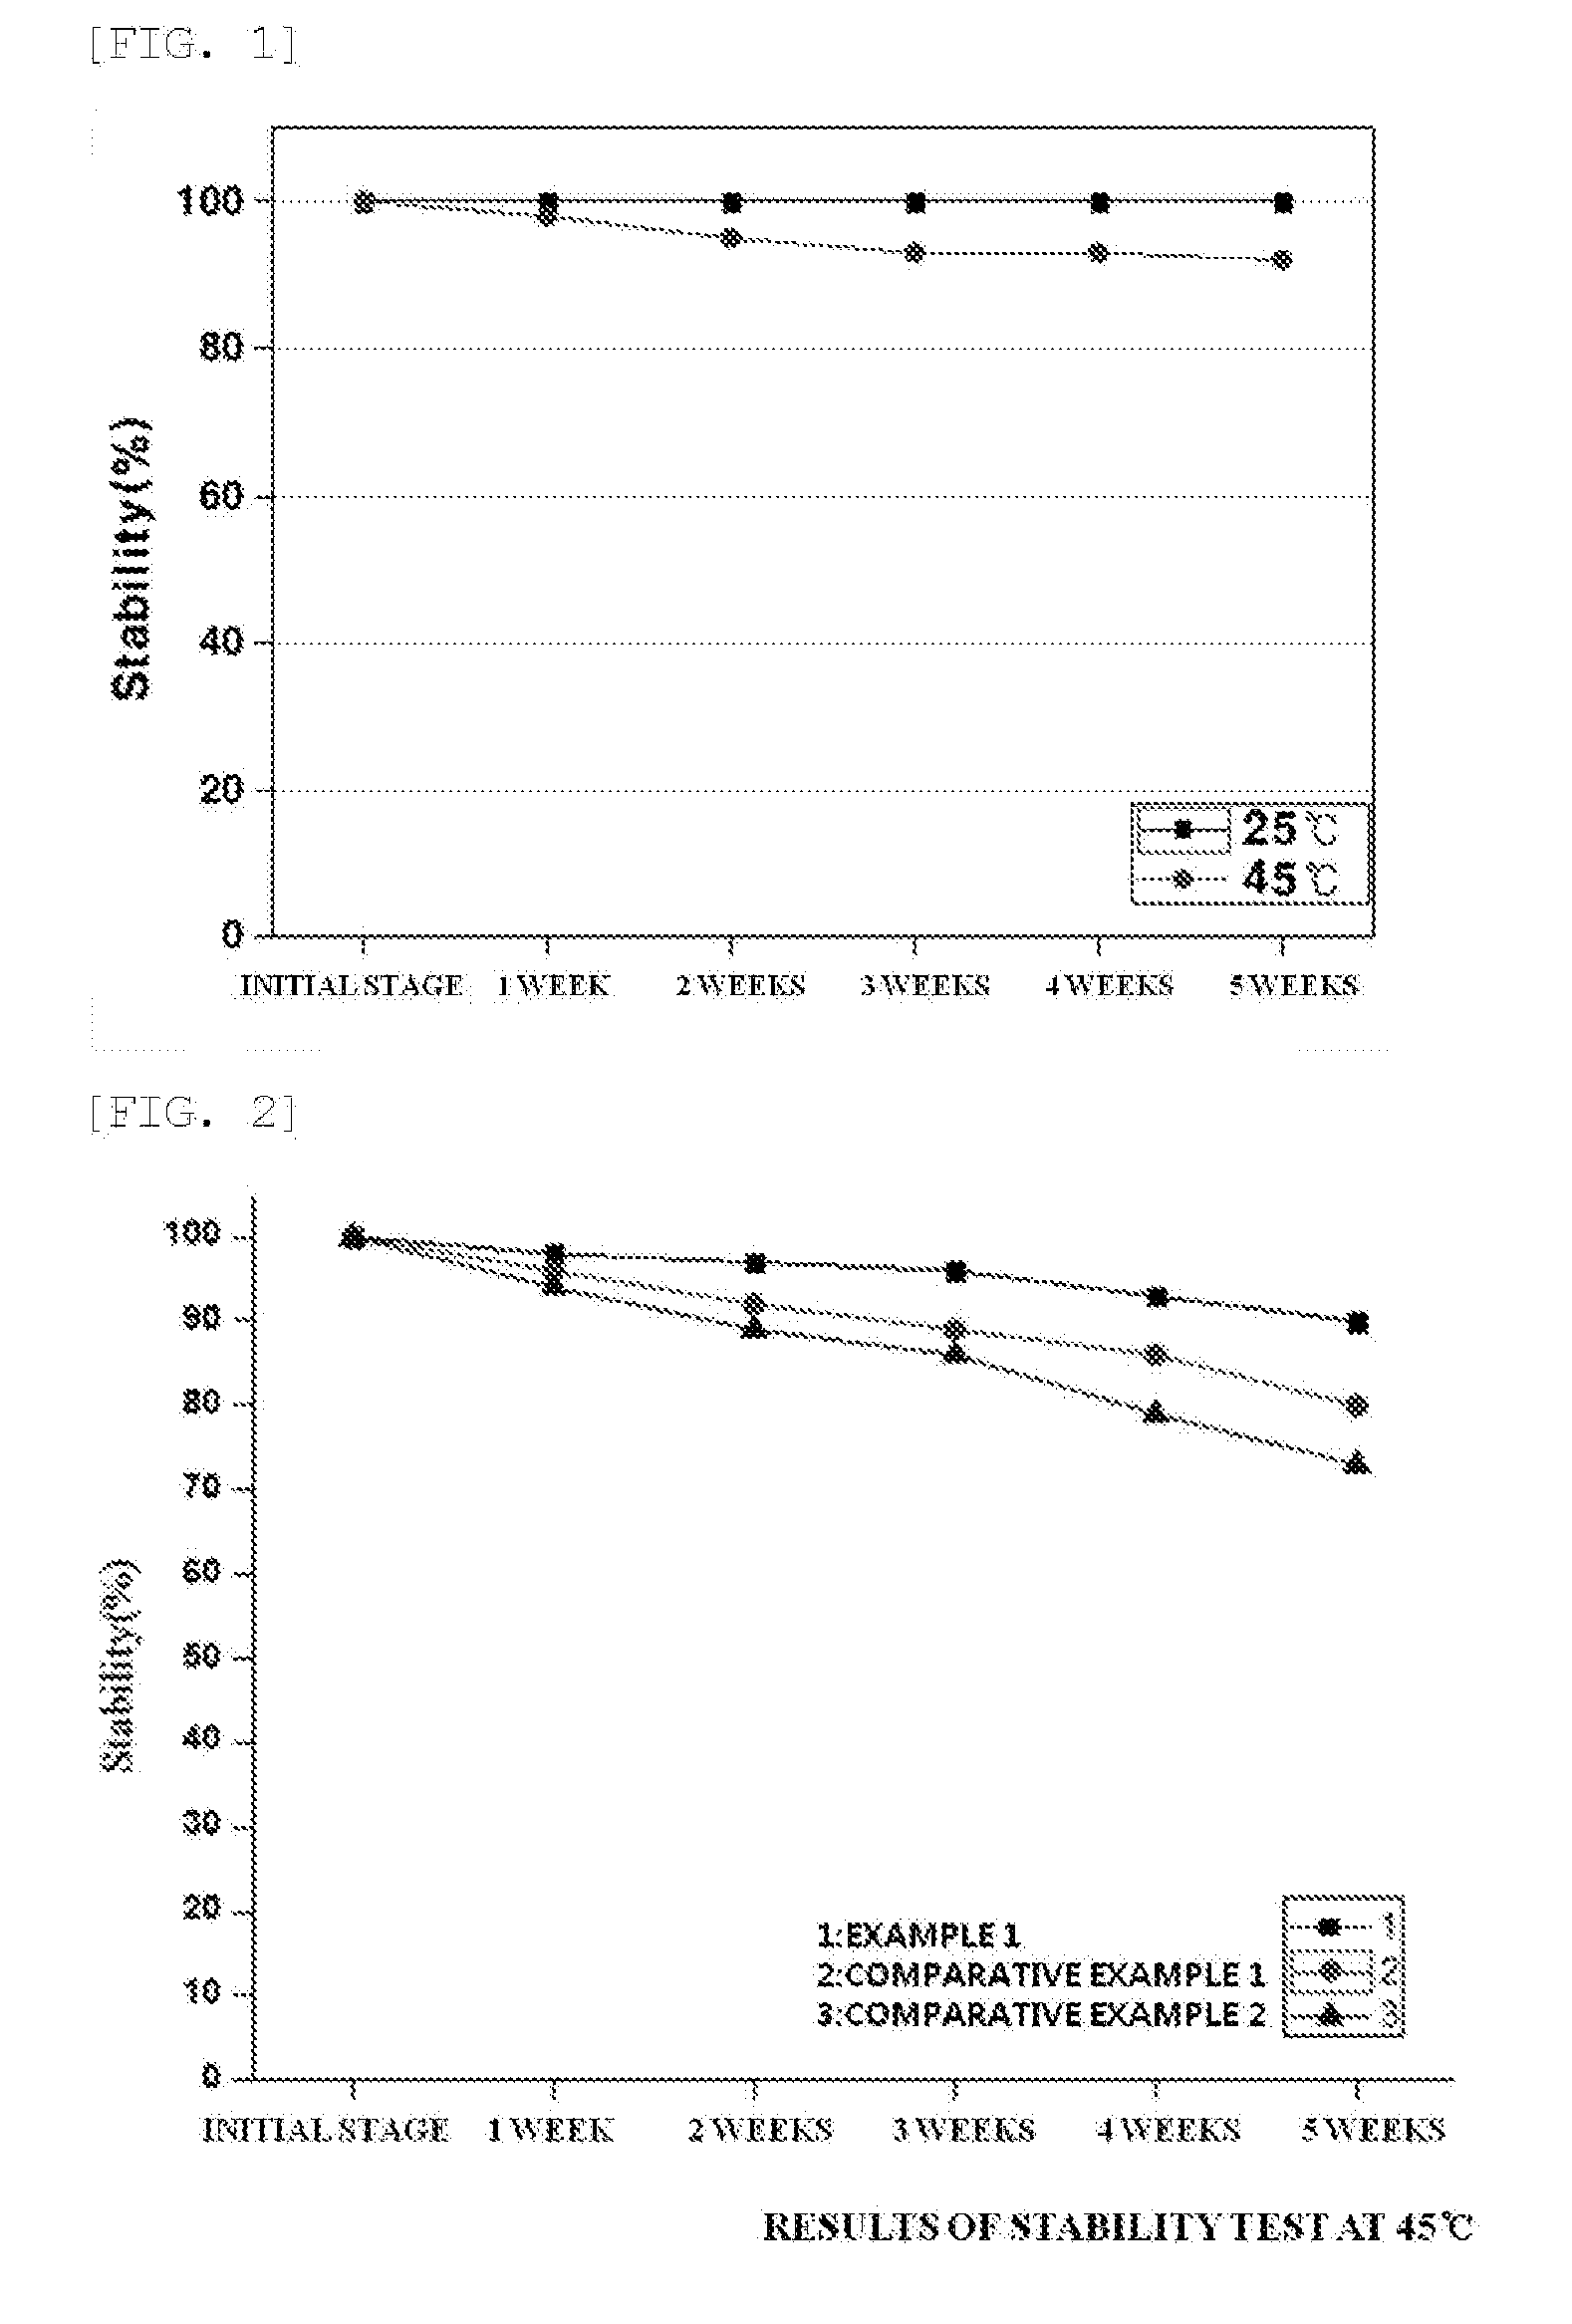 Cosmetic composition containing retinol stabilized by porous polymer beads and nanoemulsion